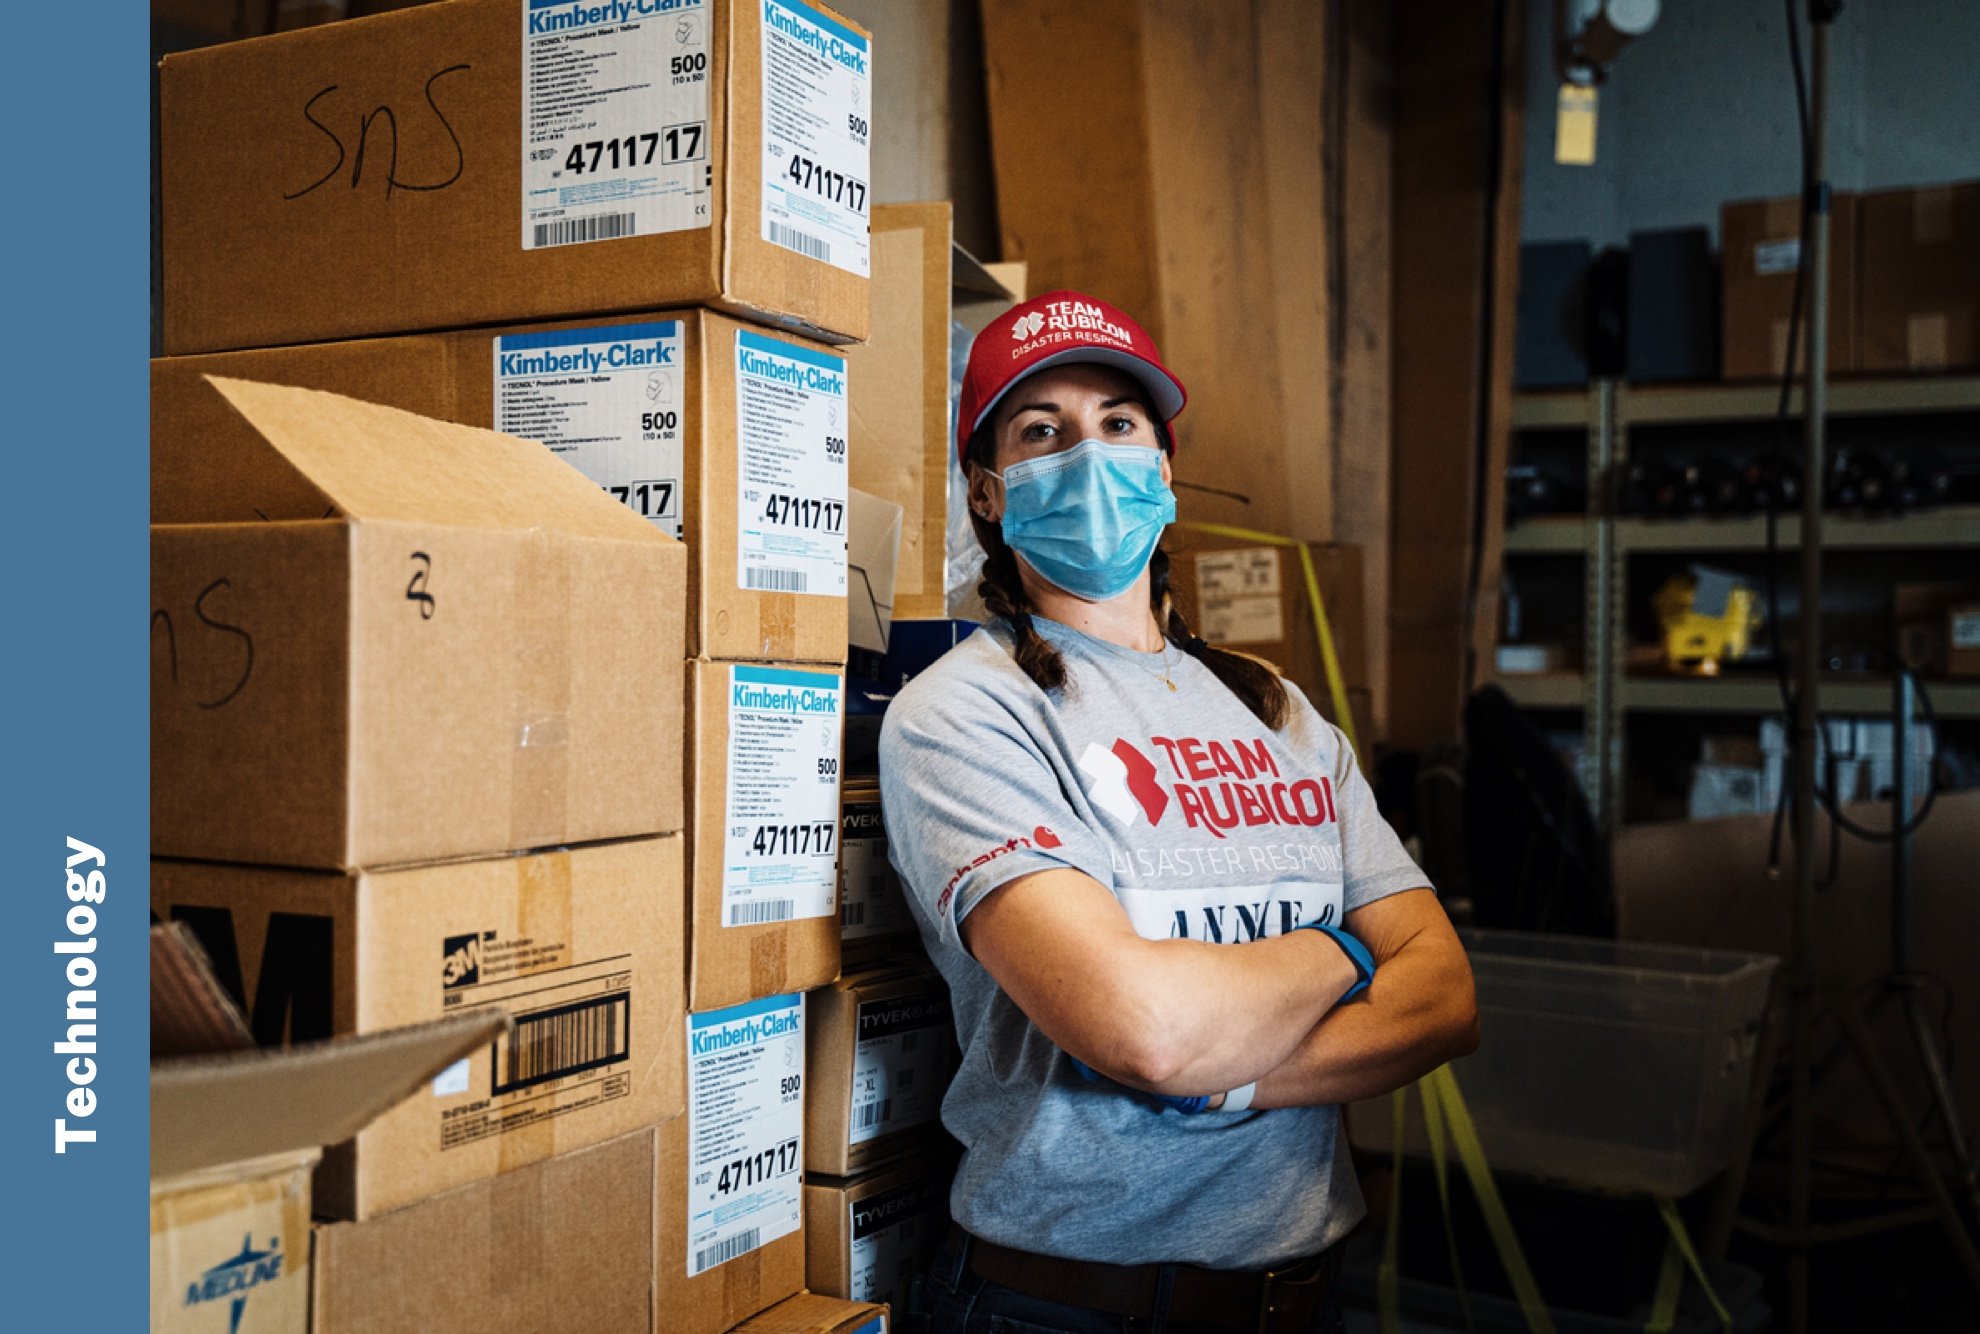 Technology: A Team Rubicon volunteer organizes disaster response materials in a warehouse.